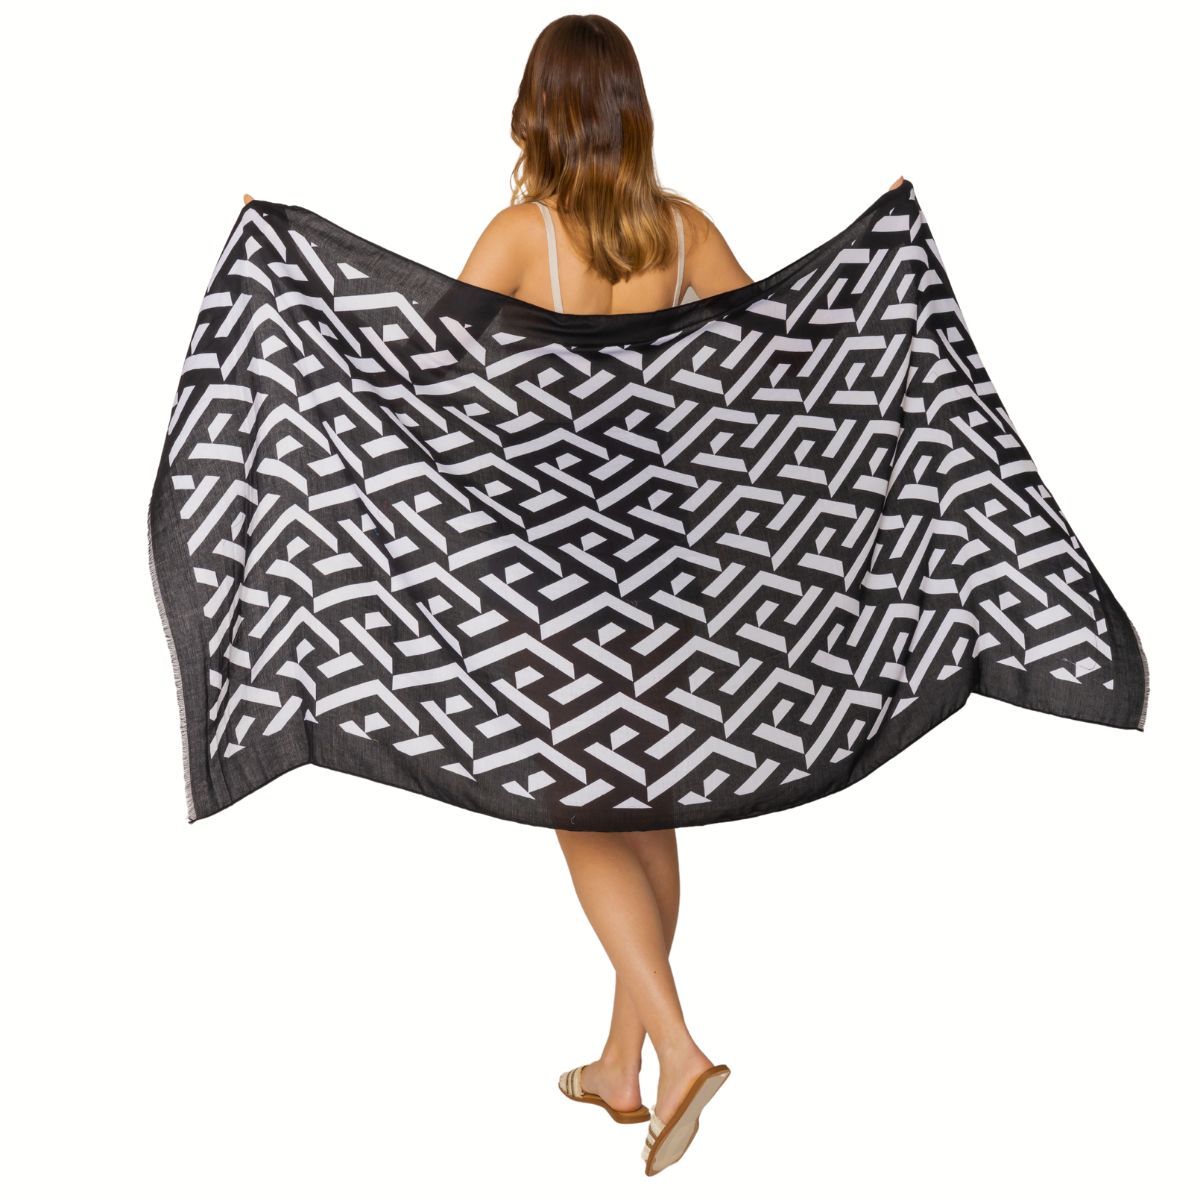 Scarf Wrap Geo Print Black and White for Women